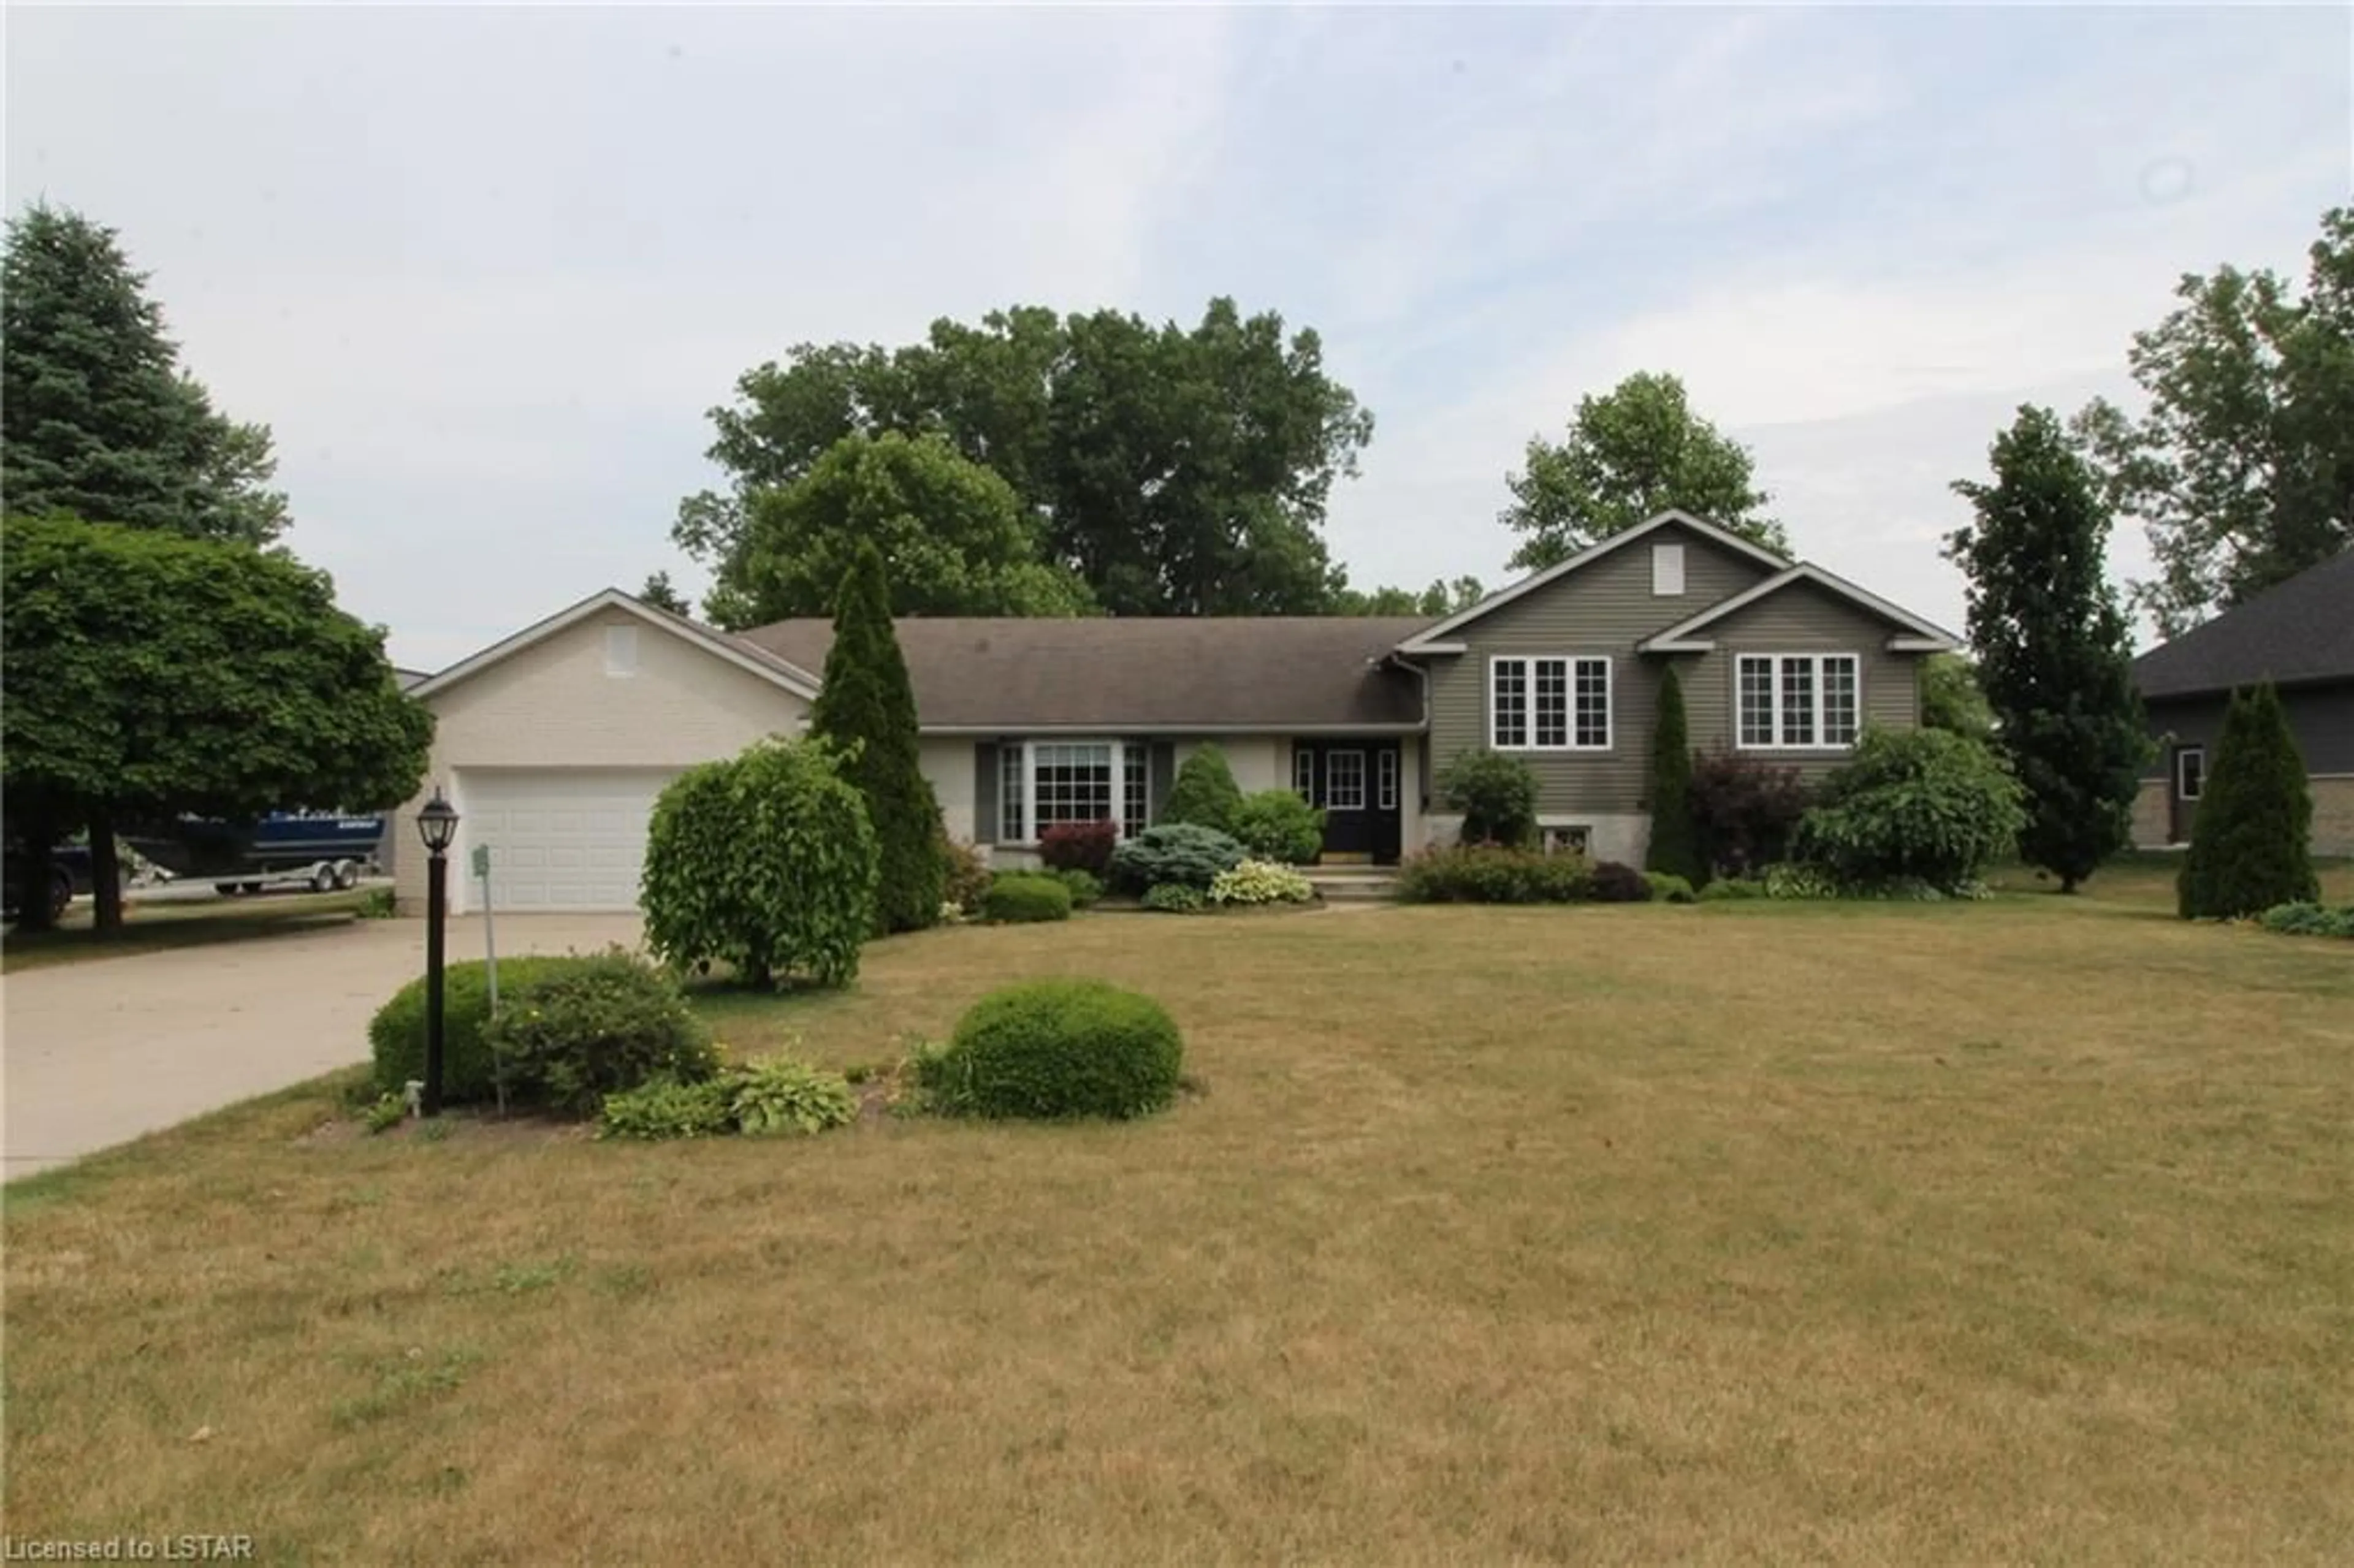 Frontside or backside of a home for 9857 Leonard St, Grand Bend Ontario N0M 1T0